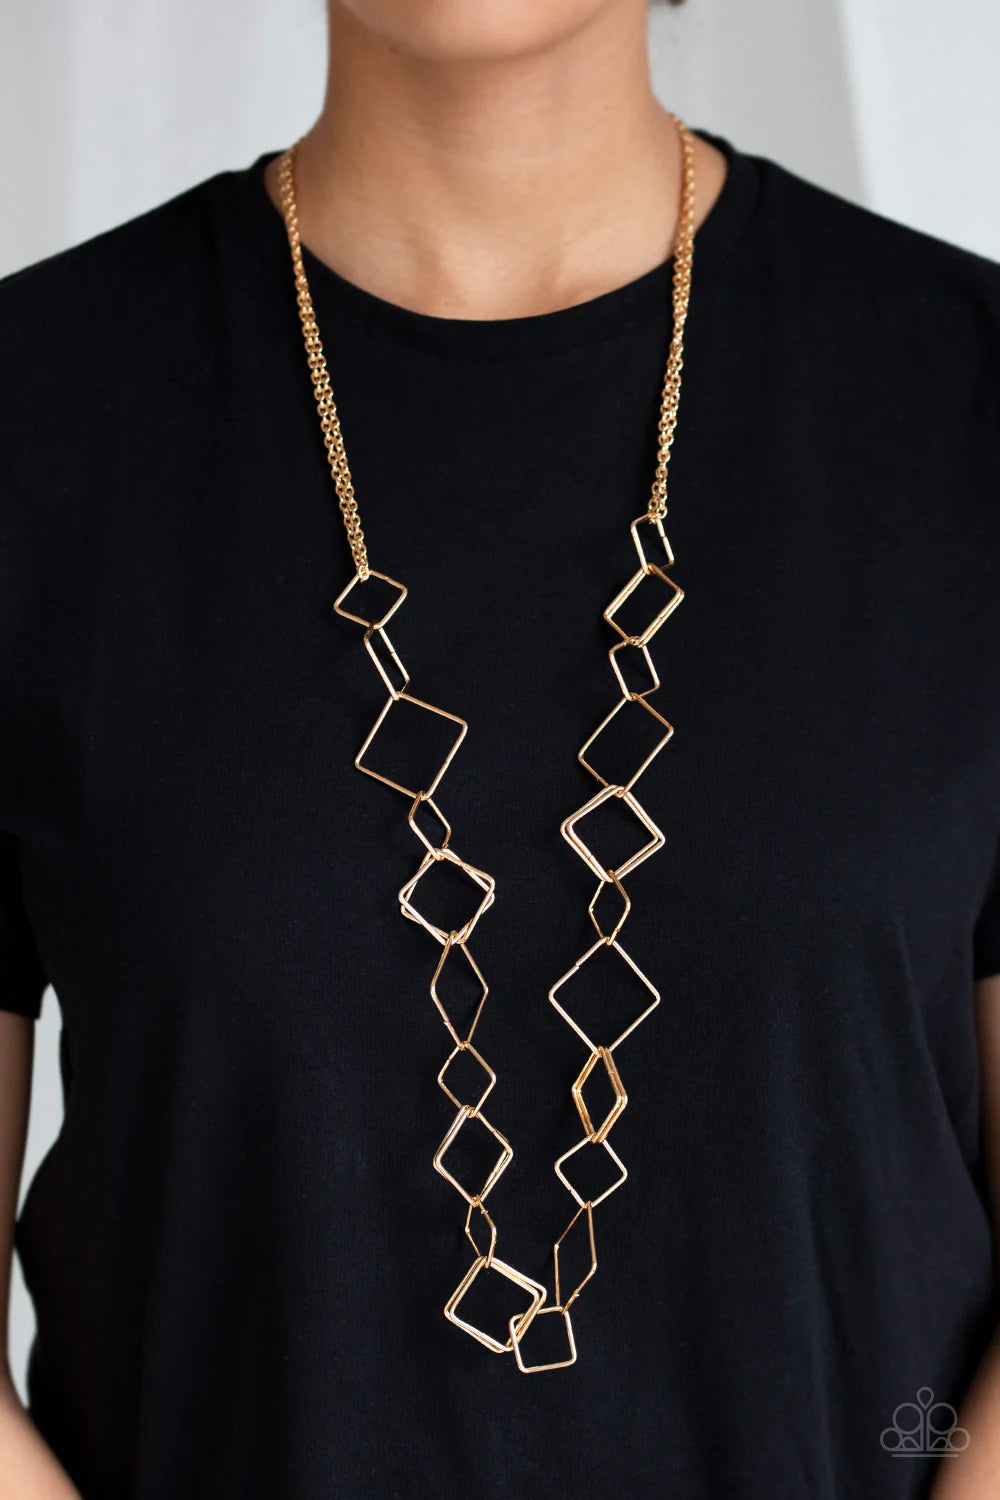 Paparazzi “Backed into a Corner” Gold Link Necklace